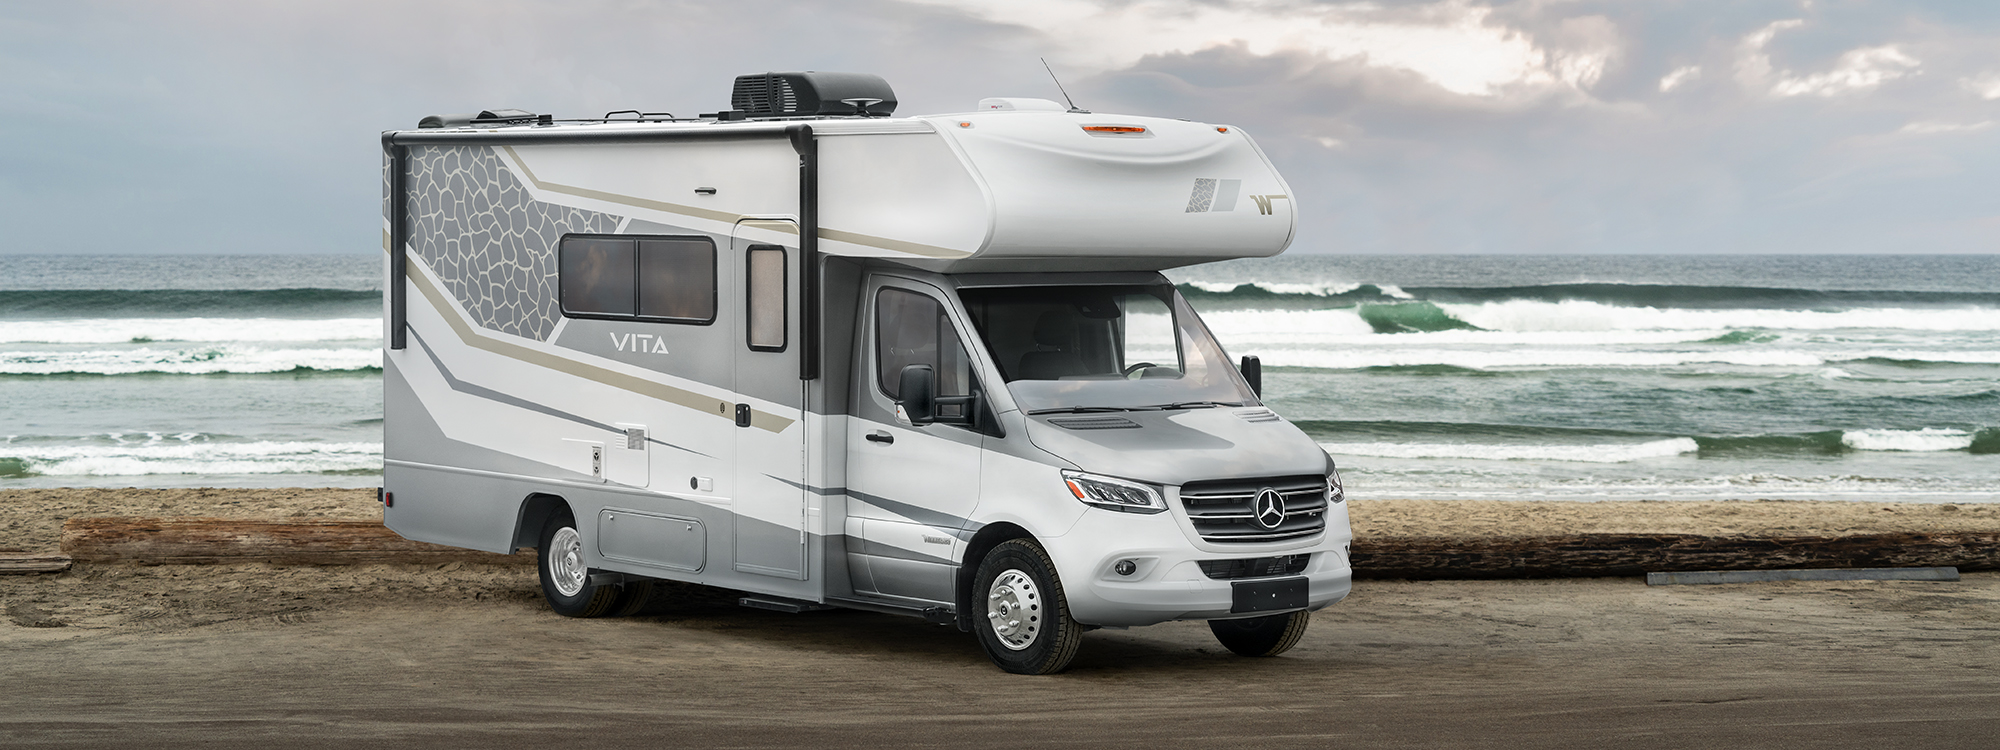 winnebago vita parked with a scenic background